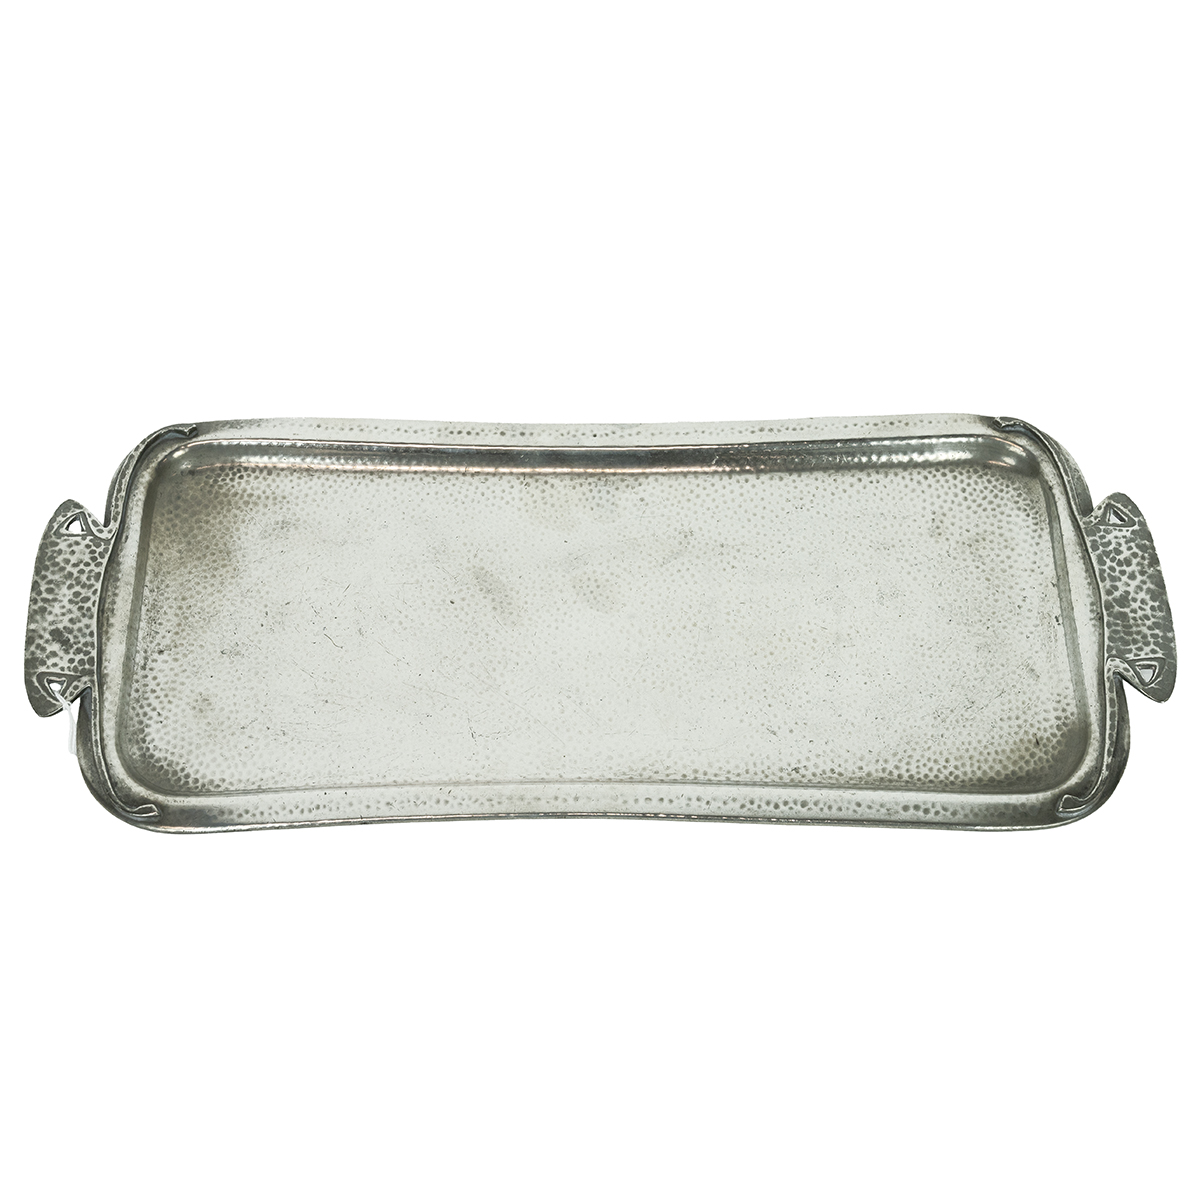 Tudric pewter Art Nouveau two handled tray, stamped marks to underside "H Made in England TUDRIC ...